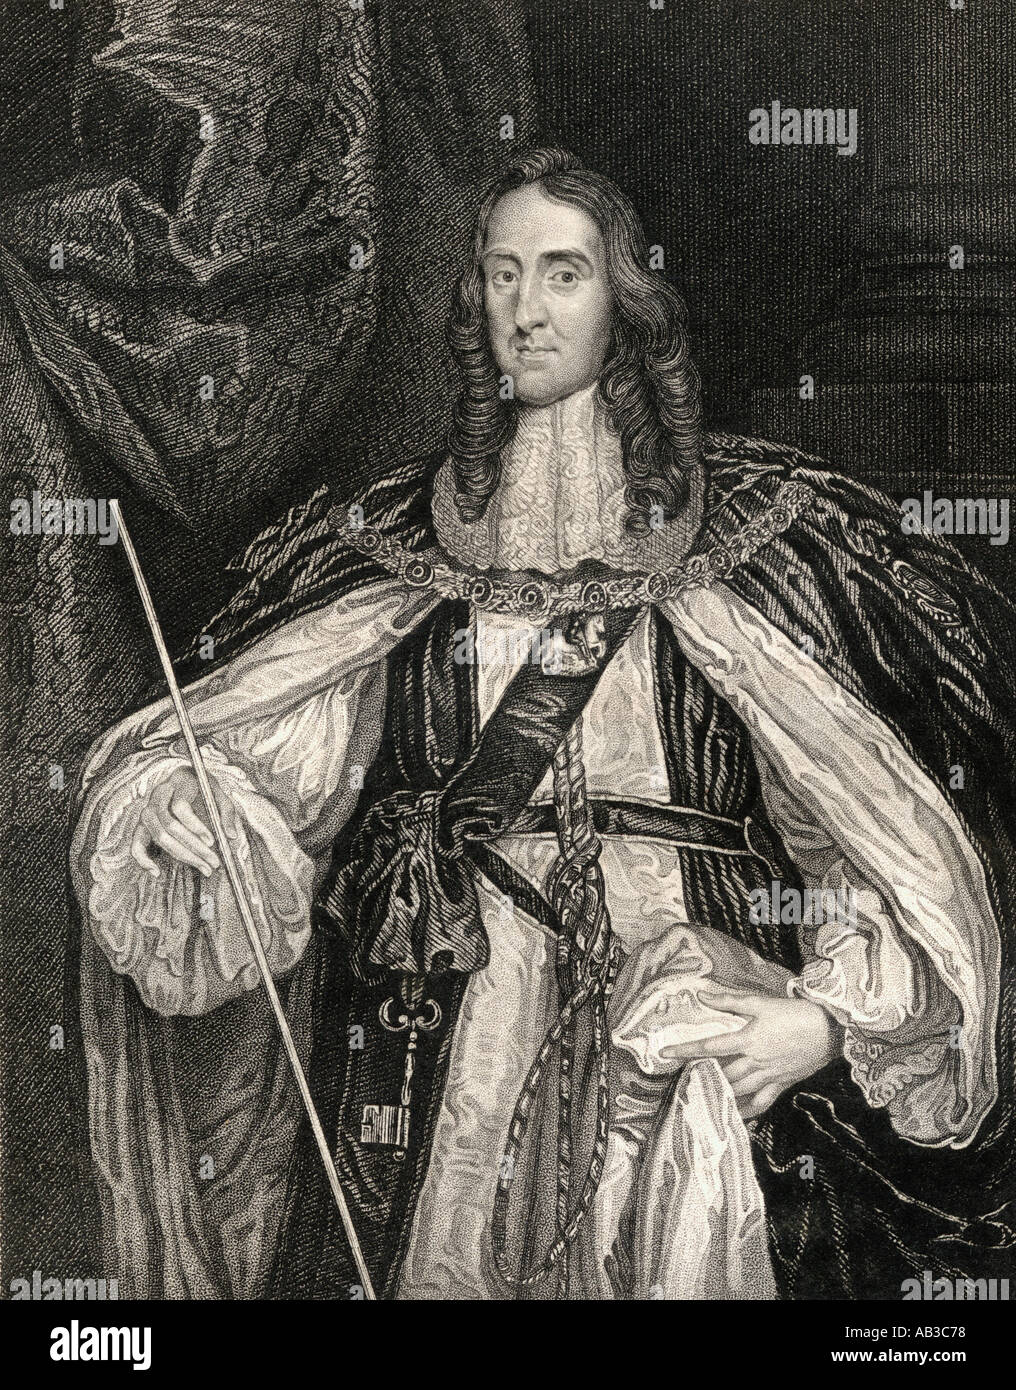 Edward Montagu, 2nd Earl of Manchester, Viscount Mandeville, 1602 - 1671 Parliamentary general in English Civil War. Stock Photo